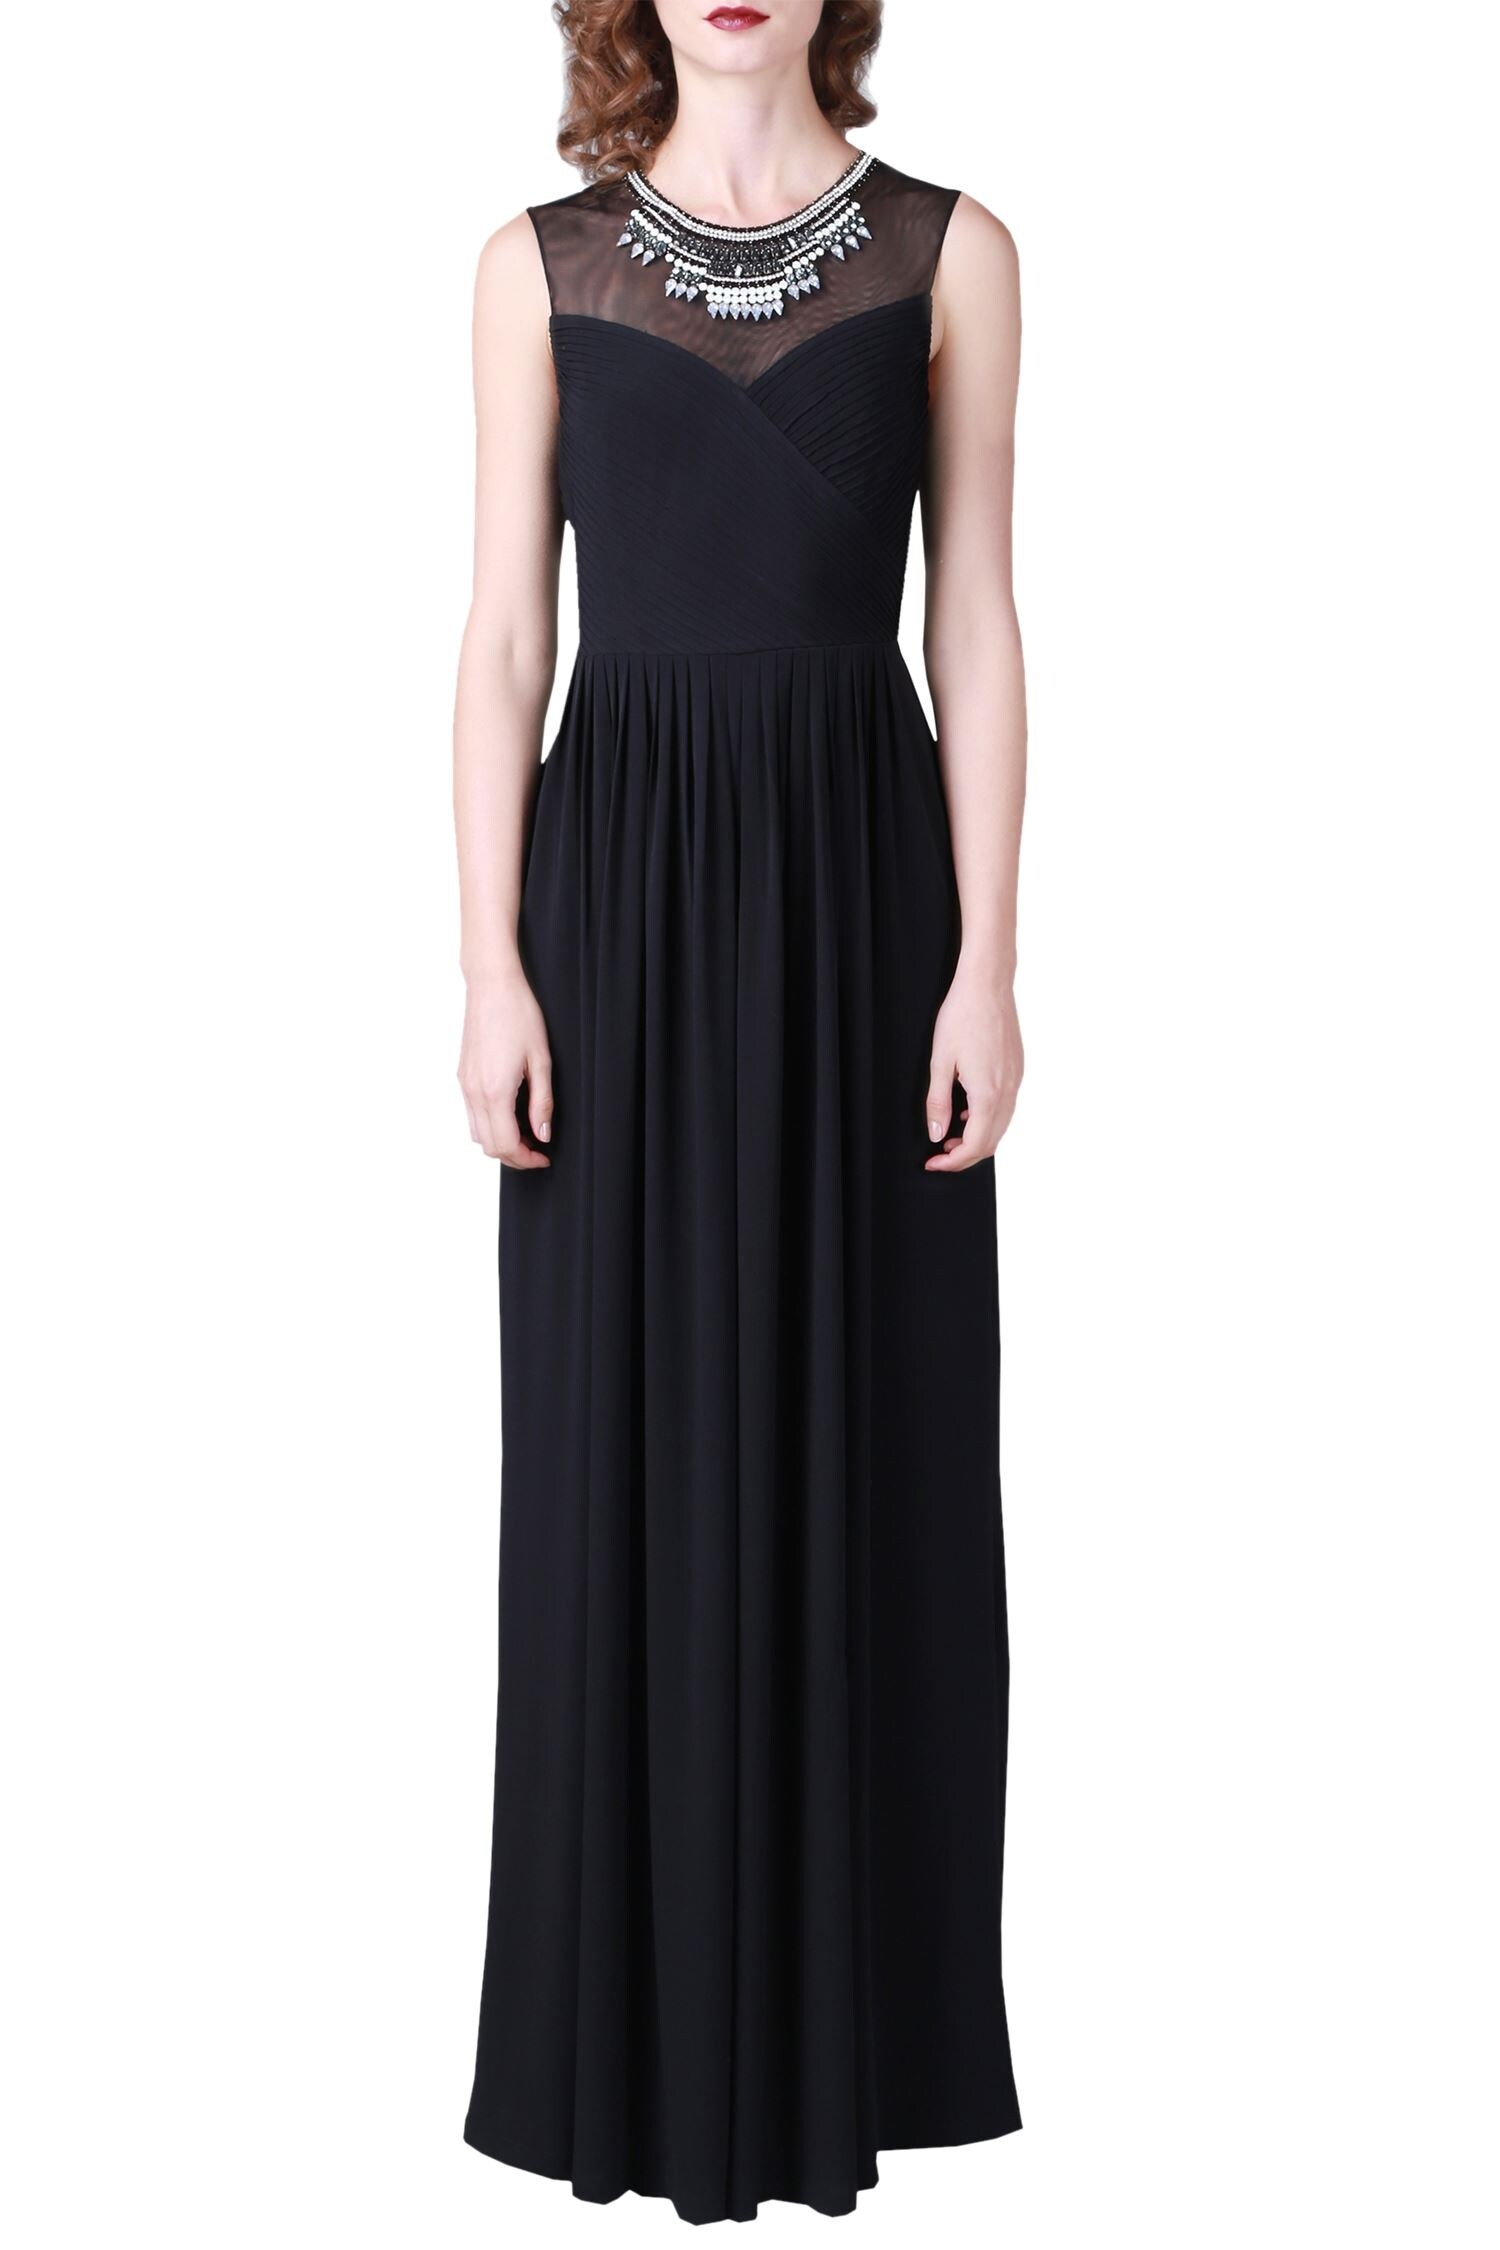 Buy Black jersey gown with embellished neckline by Ranna Gill at Aza ...